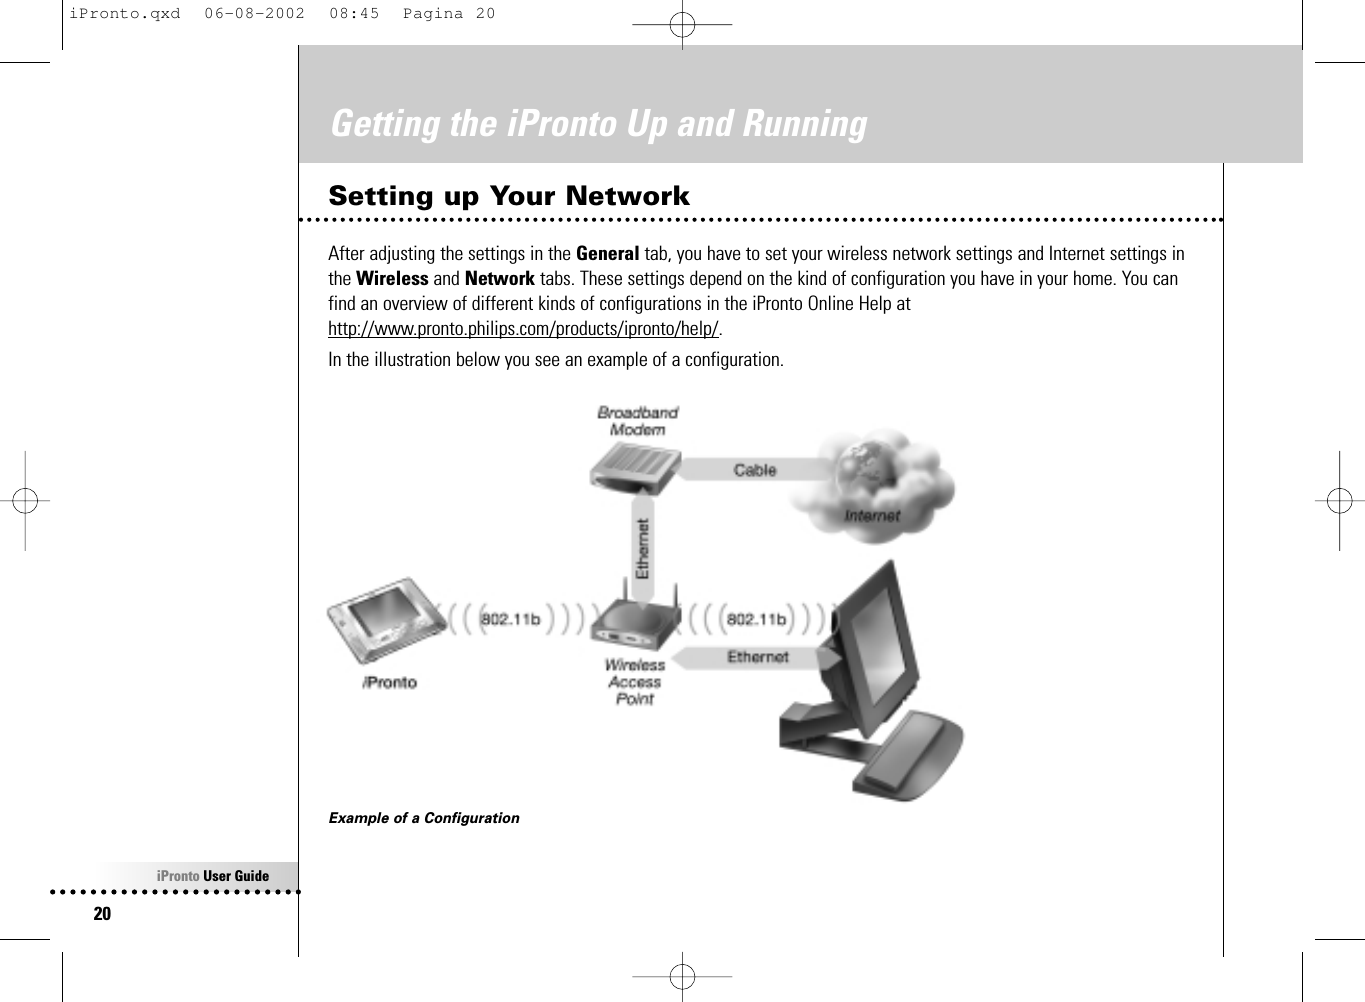 iPronto User Guide20Getting the iPronto Up and RunningSetting up Your NetworkAfter adjusting the settings in the General tab, you have to set your wireless network settings and Internet settings inthe Wireless and Network tabs. These settings depend on the kind of configuration you have in your home. You canfind an overview of different kinds of configurations in the iPronto Online Help athttp://www.pronto.philips.com/products/ipronto/help/.In the illustration below you see an example of a configuration.Example of a ConfigurationiPronto.qxd  06-08-2002  08:45  Pagina 20